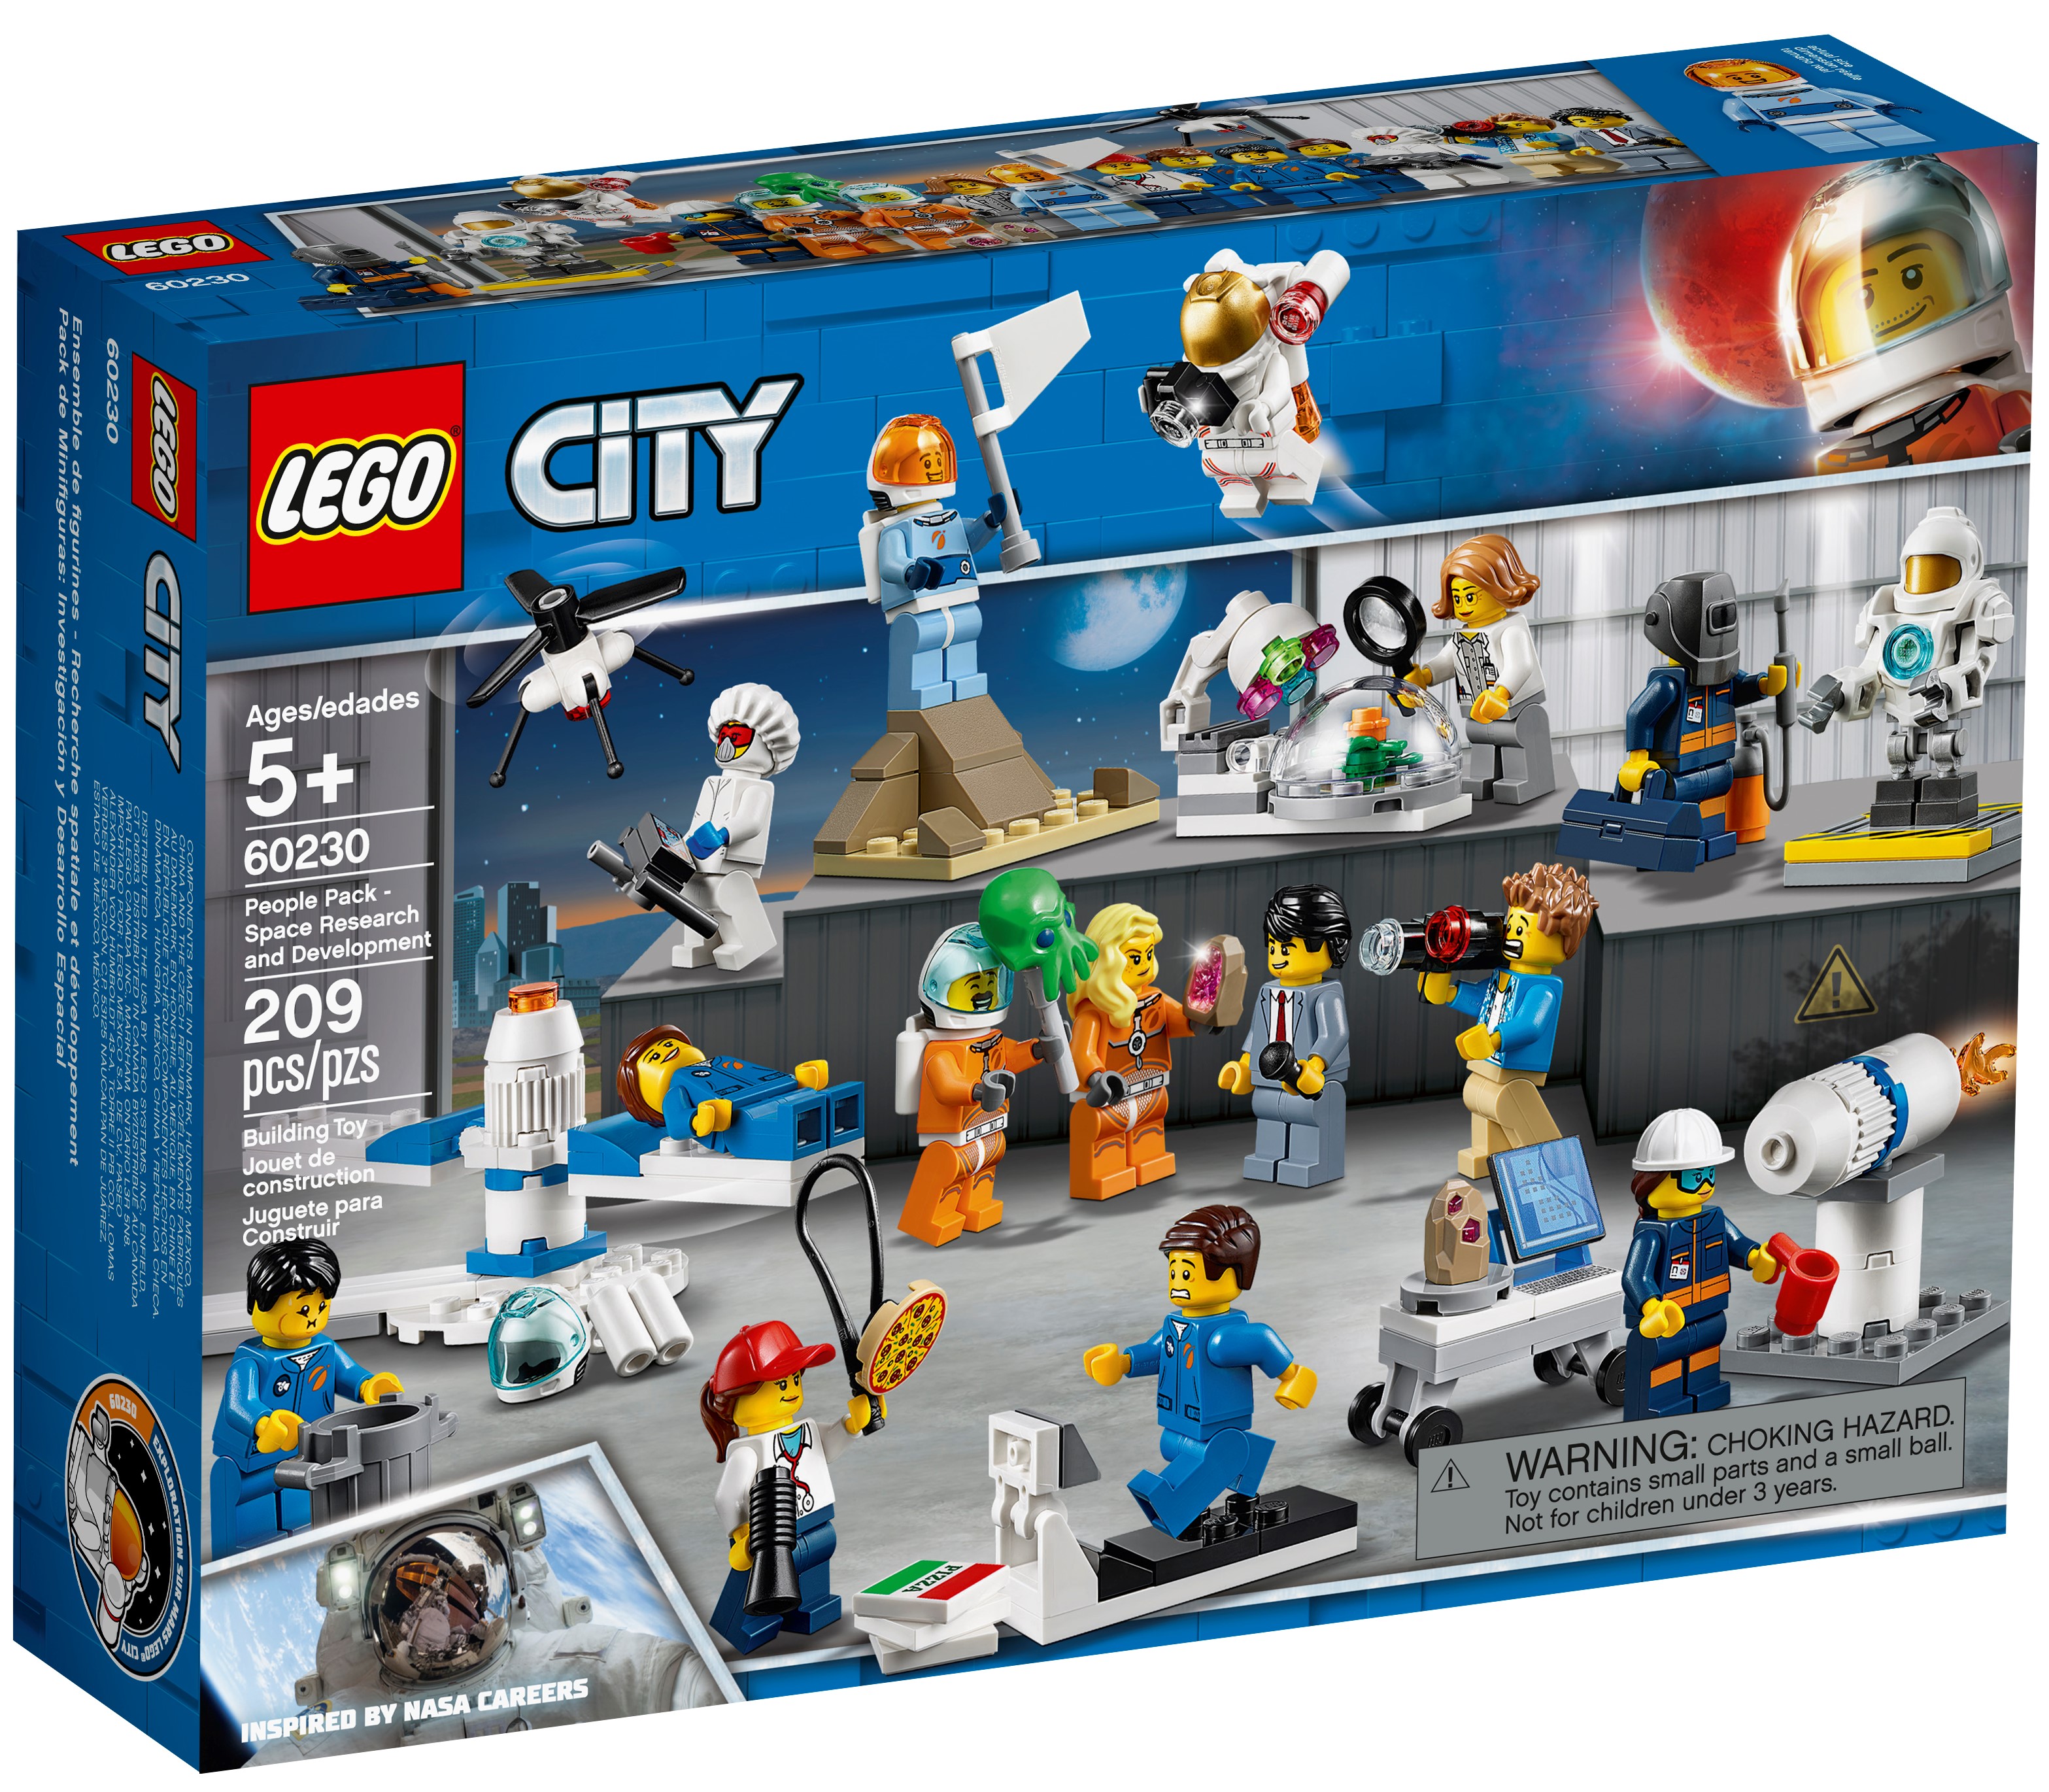 tobak Begivenhed cabriolet People Pack - Space Research and Development 60230 | City | Buy online at  the Official LEGO® Shop US